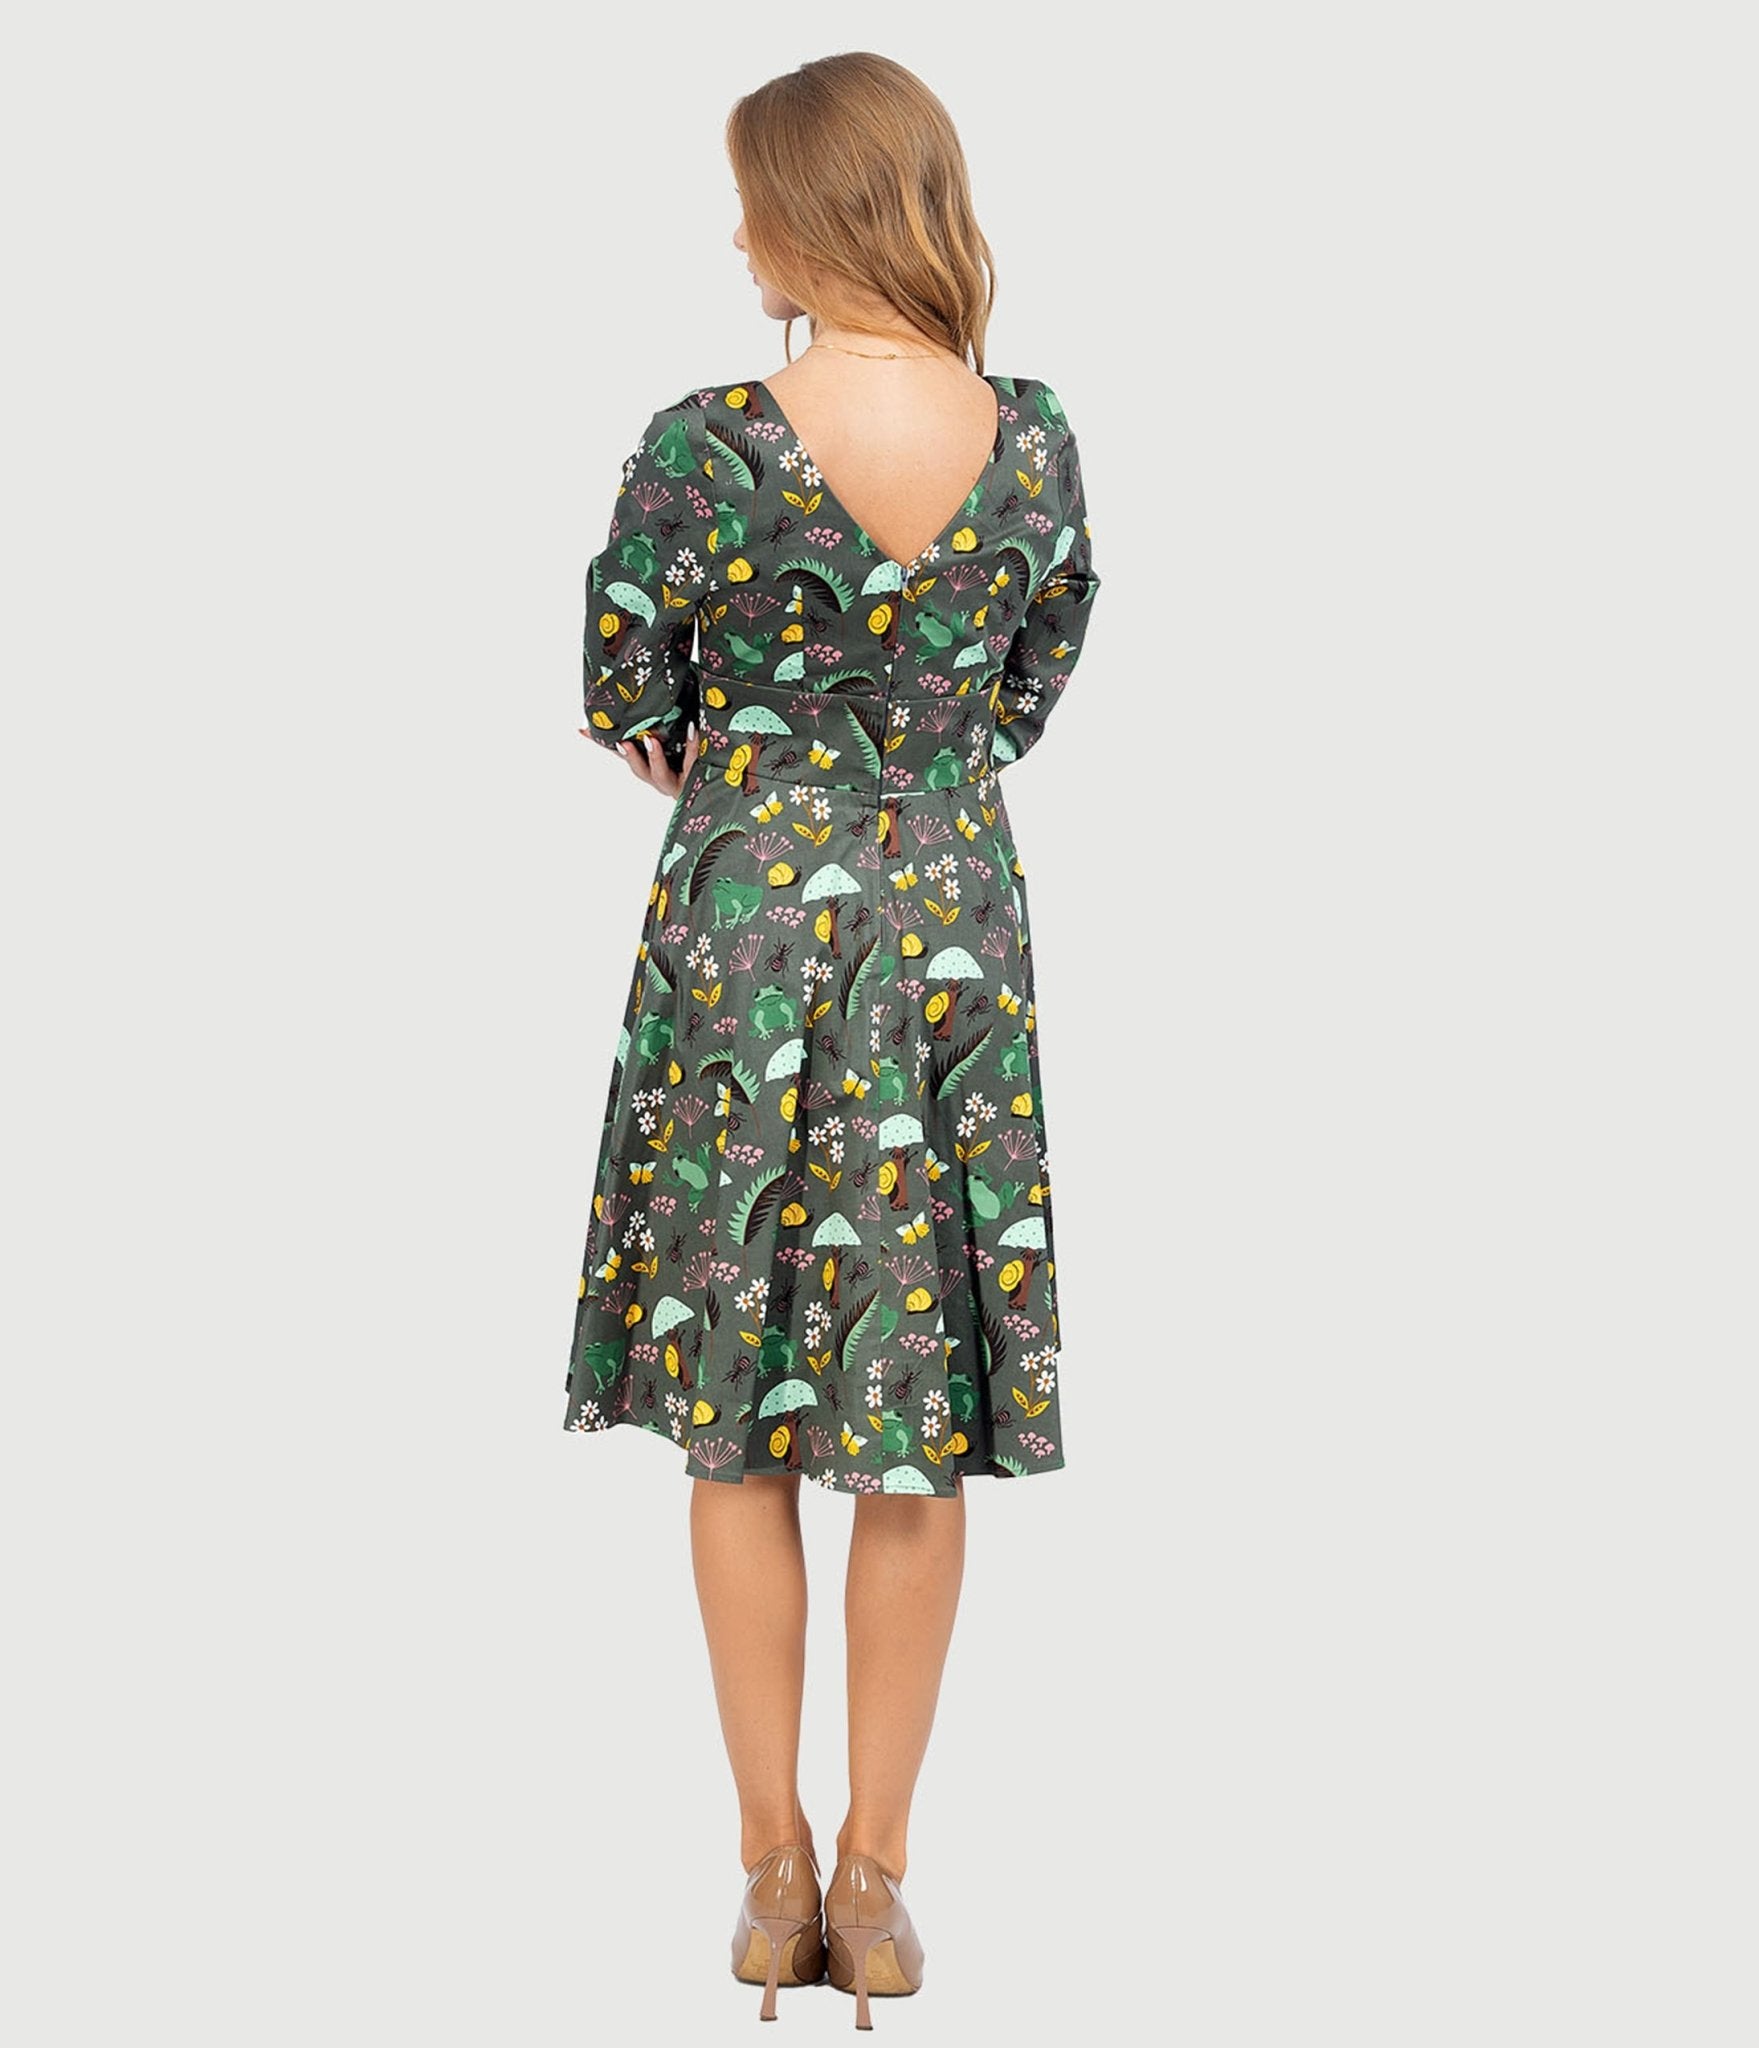 Olive Green & Rain Forest Print Fit & Flare Dress - Unique Vintage - Womens, DRESSES, FIT AND FLARE